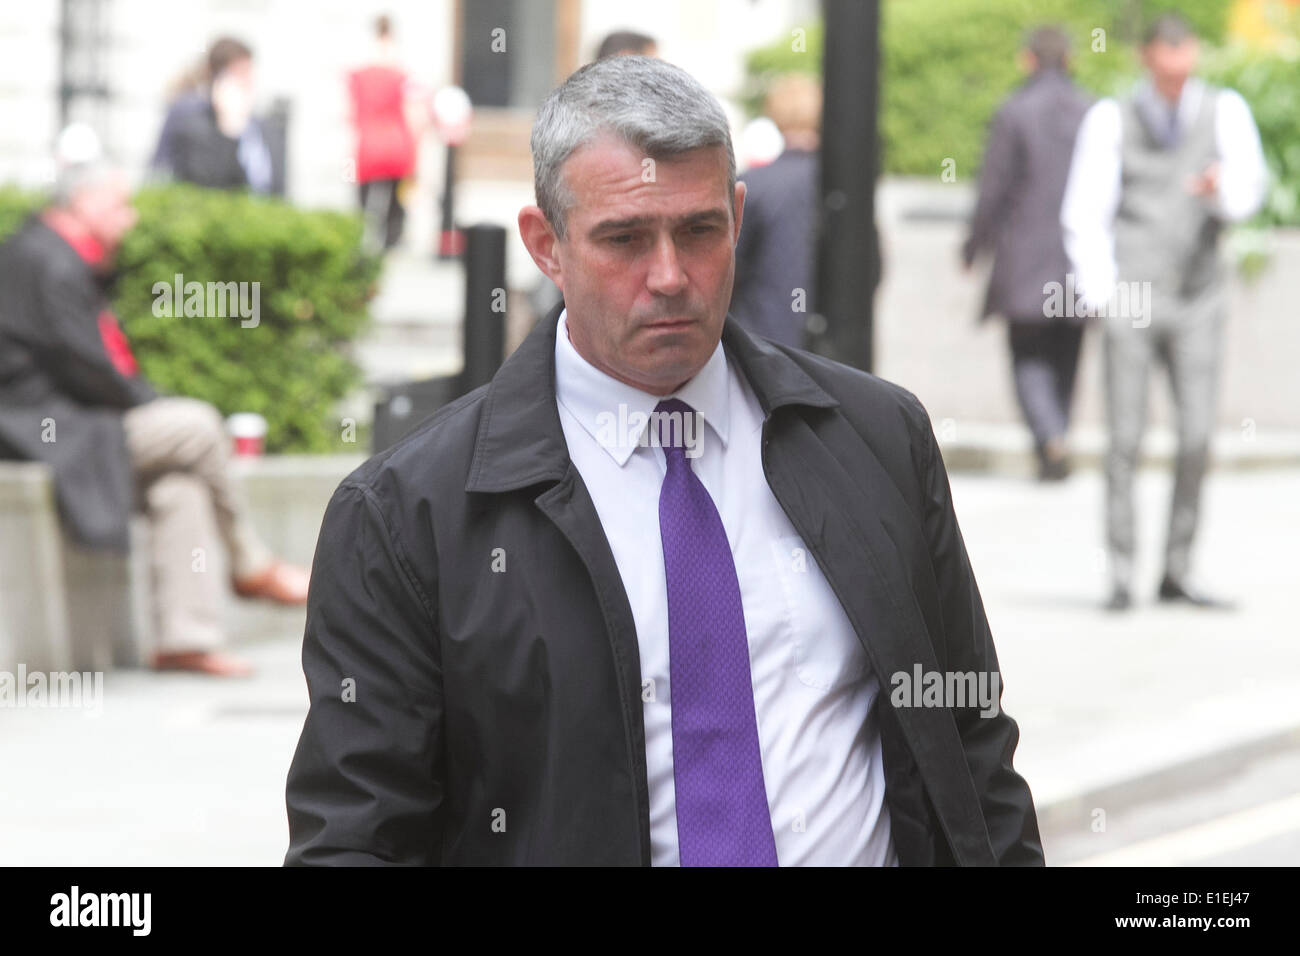 London UK. 2nd June 2014. Former Head of security at News International Mark Hanna arrives at the the Old Bailey as the hacking trial continues. Mark Hanna and seven other defendants including Rebekah Brooks, Charlie Brooks, Ian Edmonson, Stuart Kuttner,Clive Goodman,Cheryl Carter   face charges related to allegations of conspiracy to intercept communications and voice mail of well know people including that of murder victim Milly Dowler Credit:  amer ghazzal/Alamy Live News Stock Photo